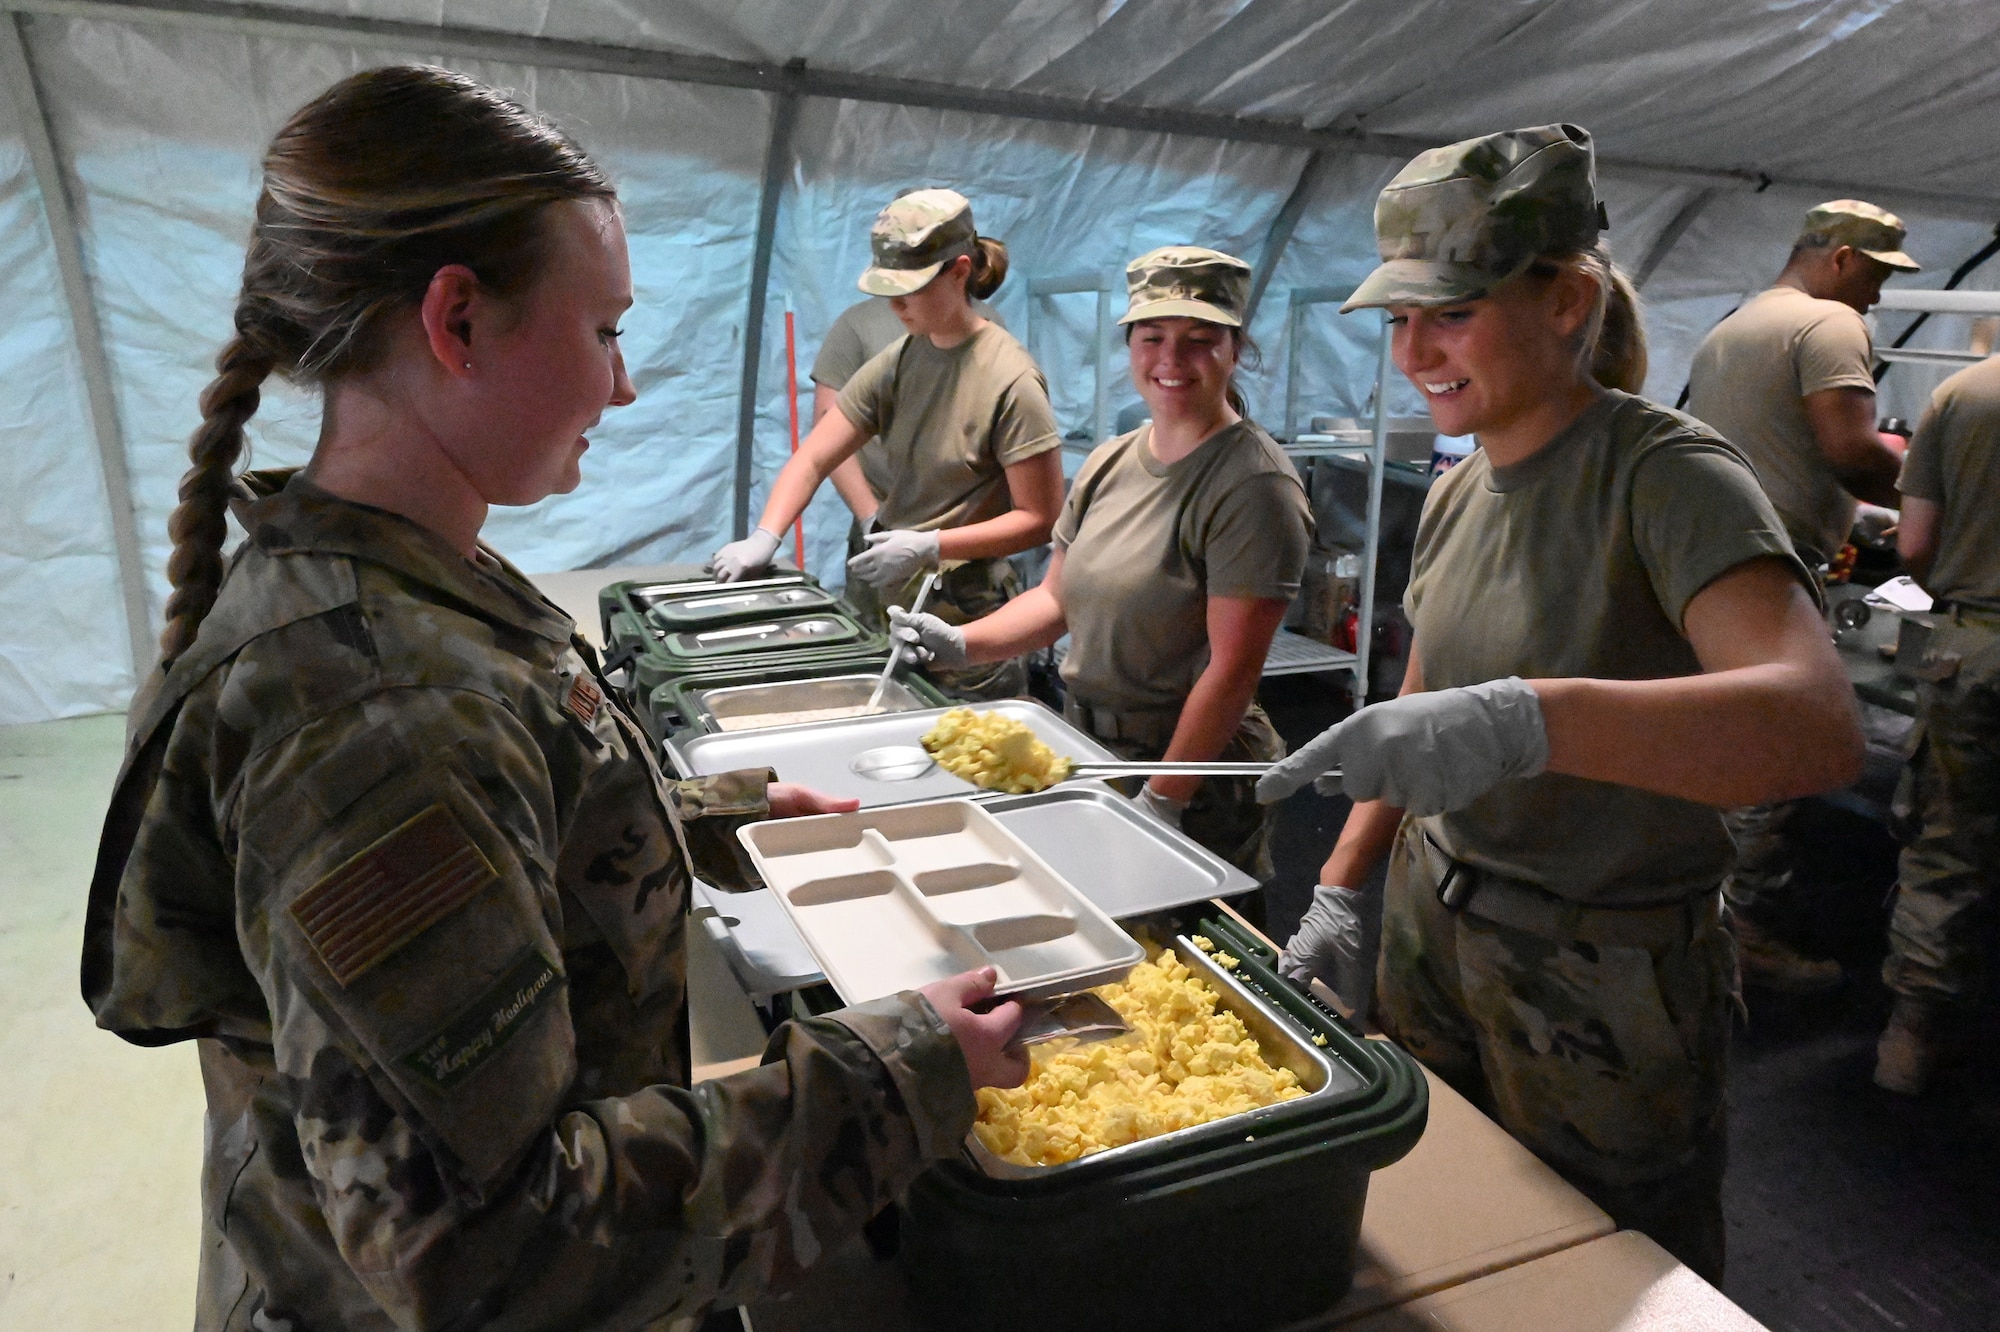 Three female military members dish food onto a tray inside a tent for another female military member at the North Dakota Air National Guard Base, Fargo, N.D., June 4, 2021.